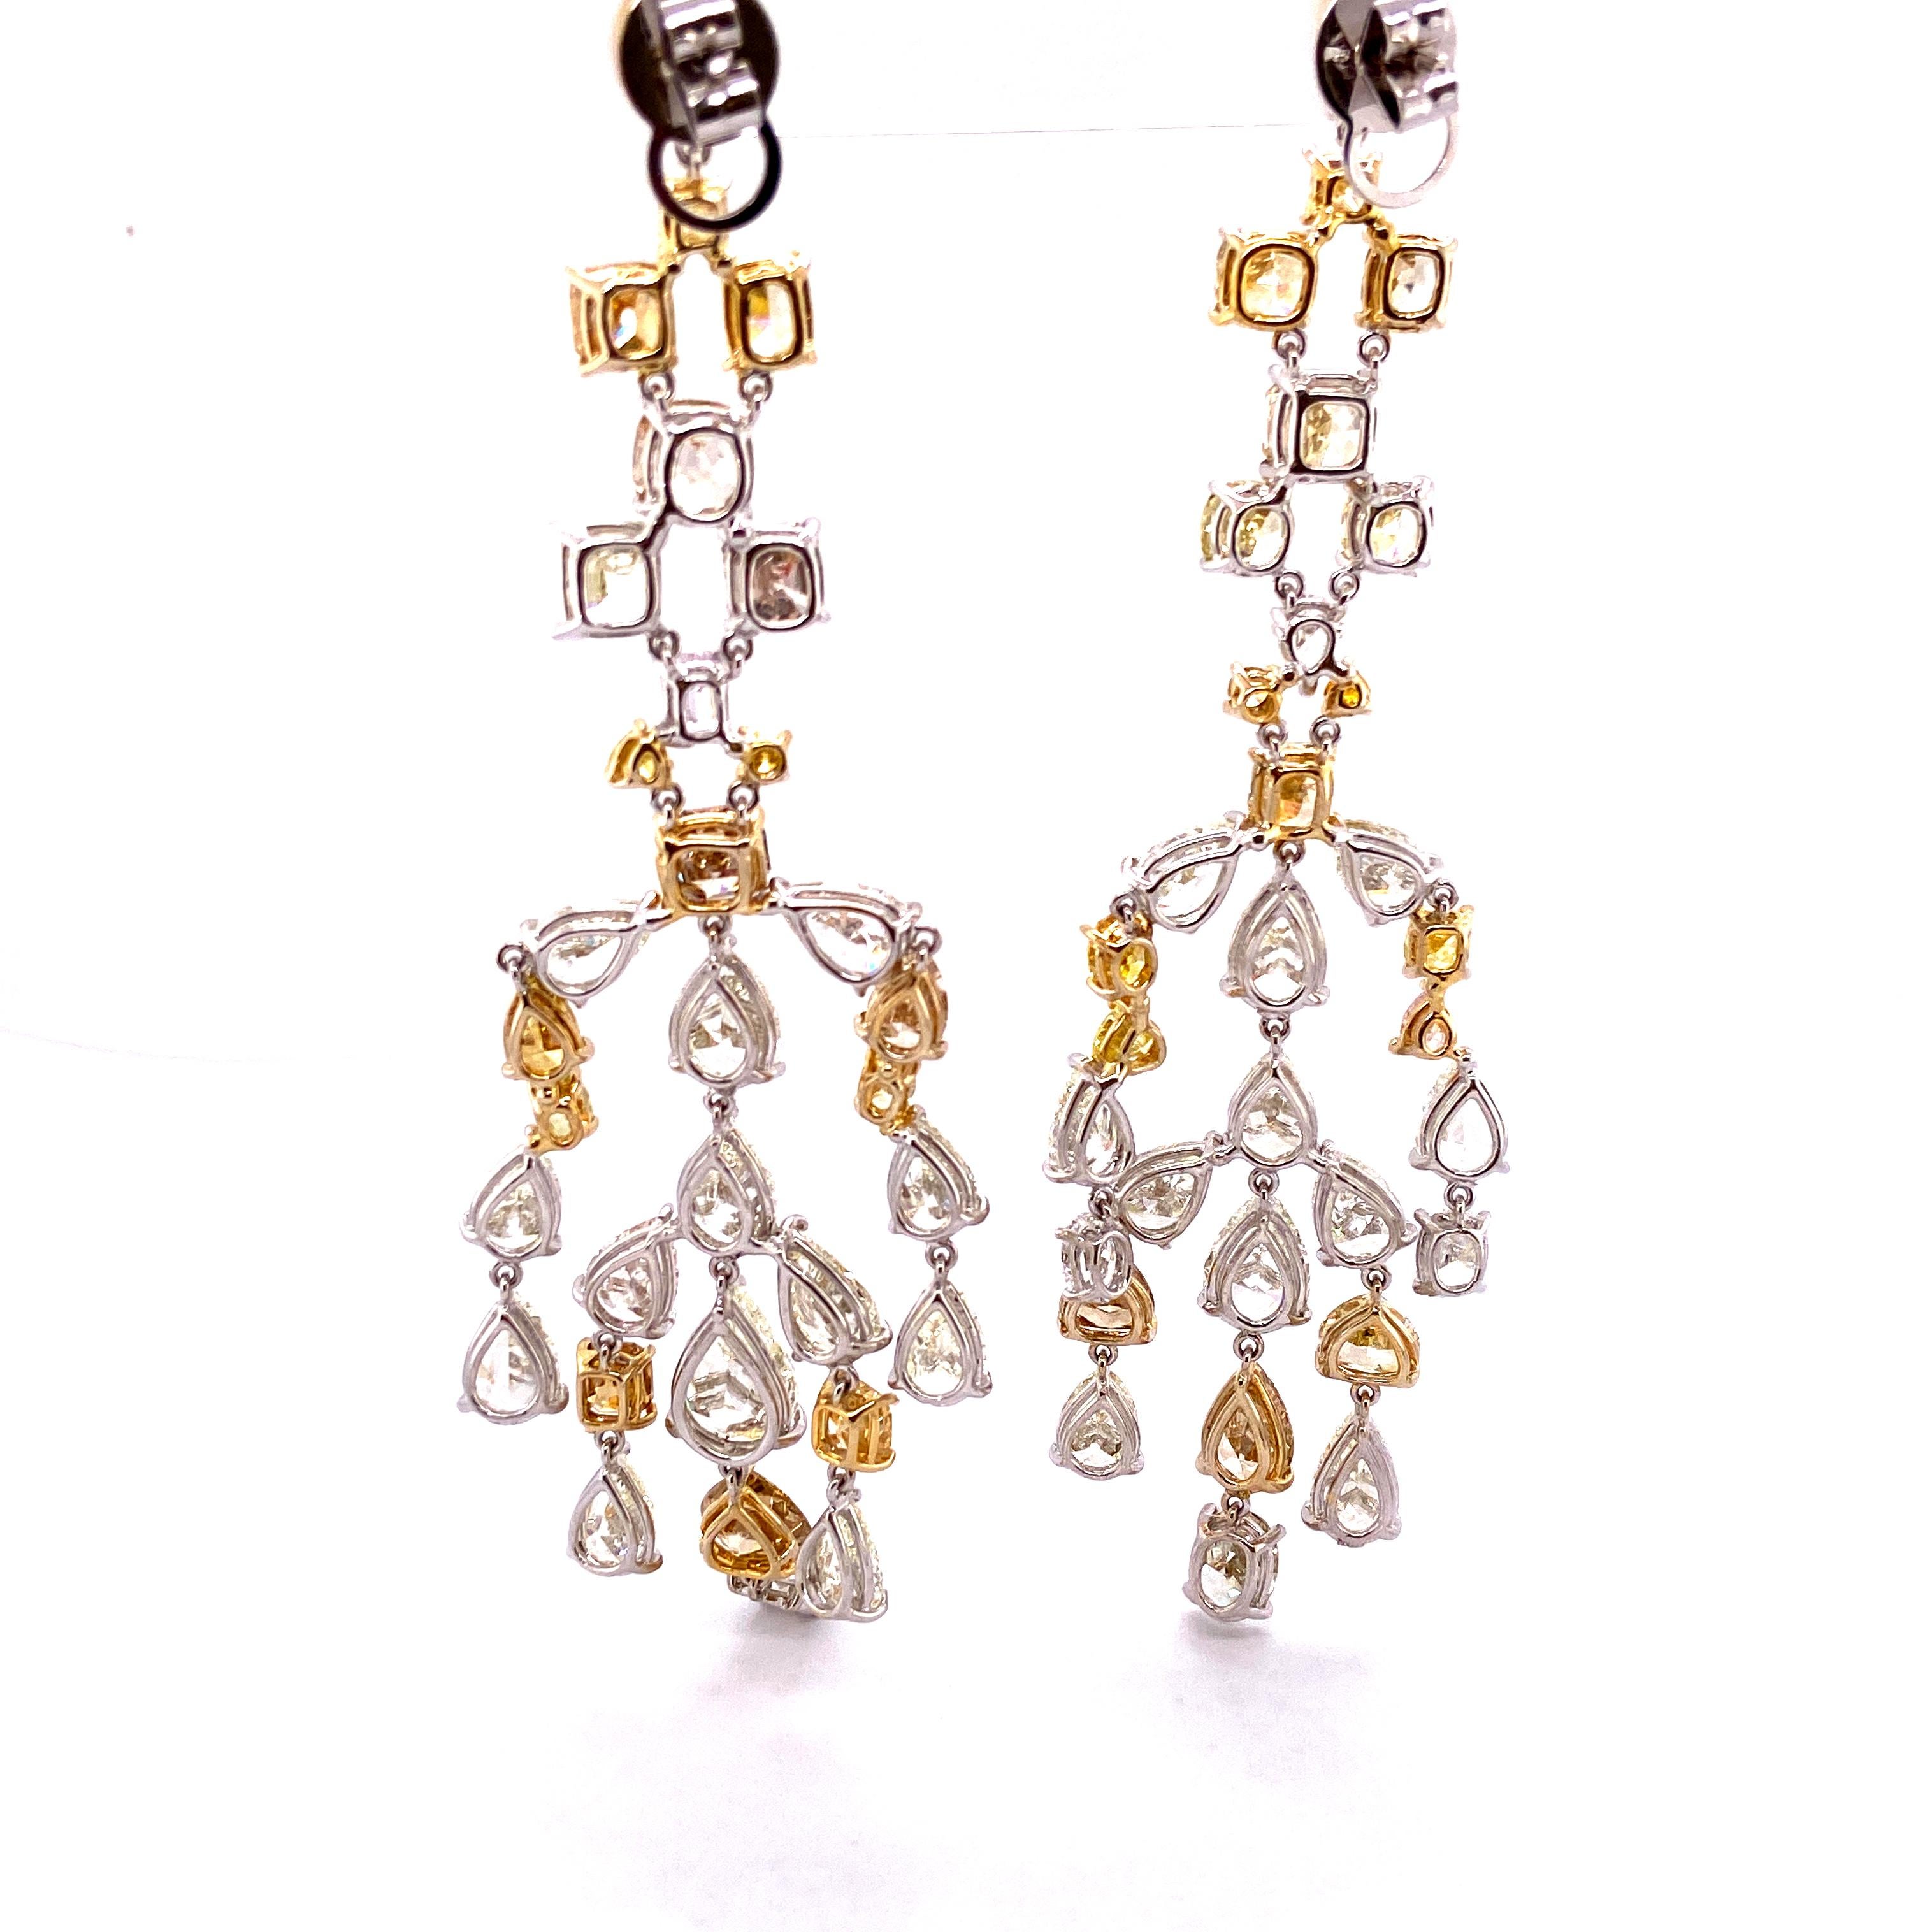 57.64 Carat Fancy Coloured Diamonds and White Diamond Chandelier Gold Earrings For Sale 7